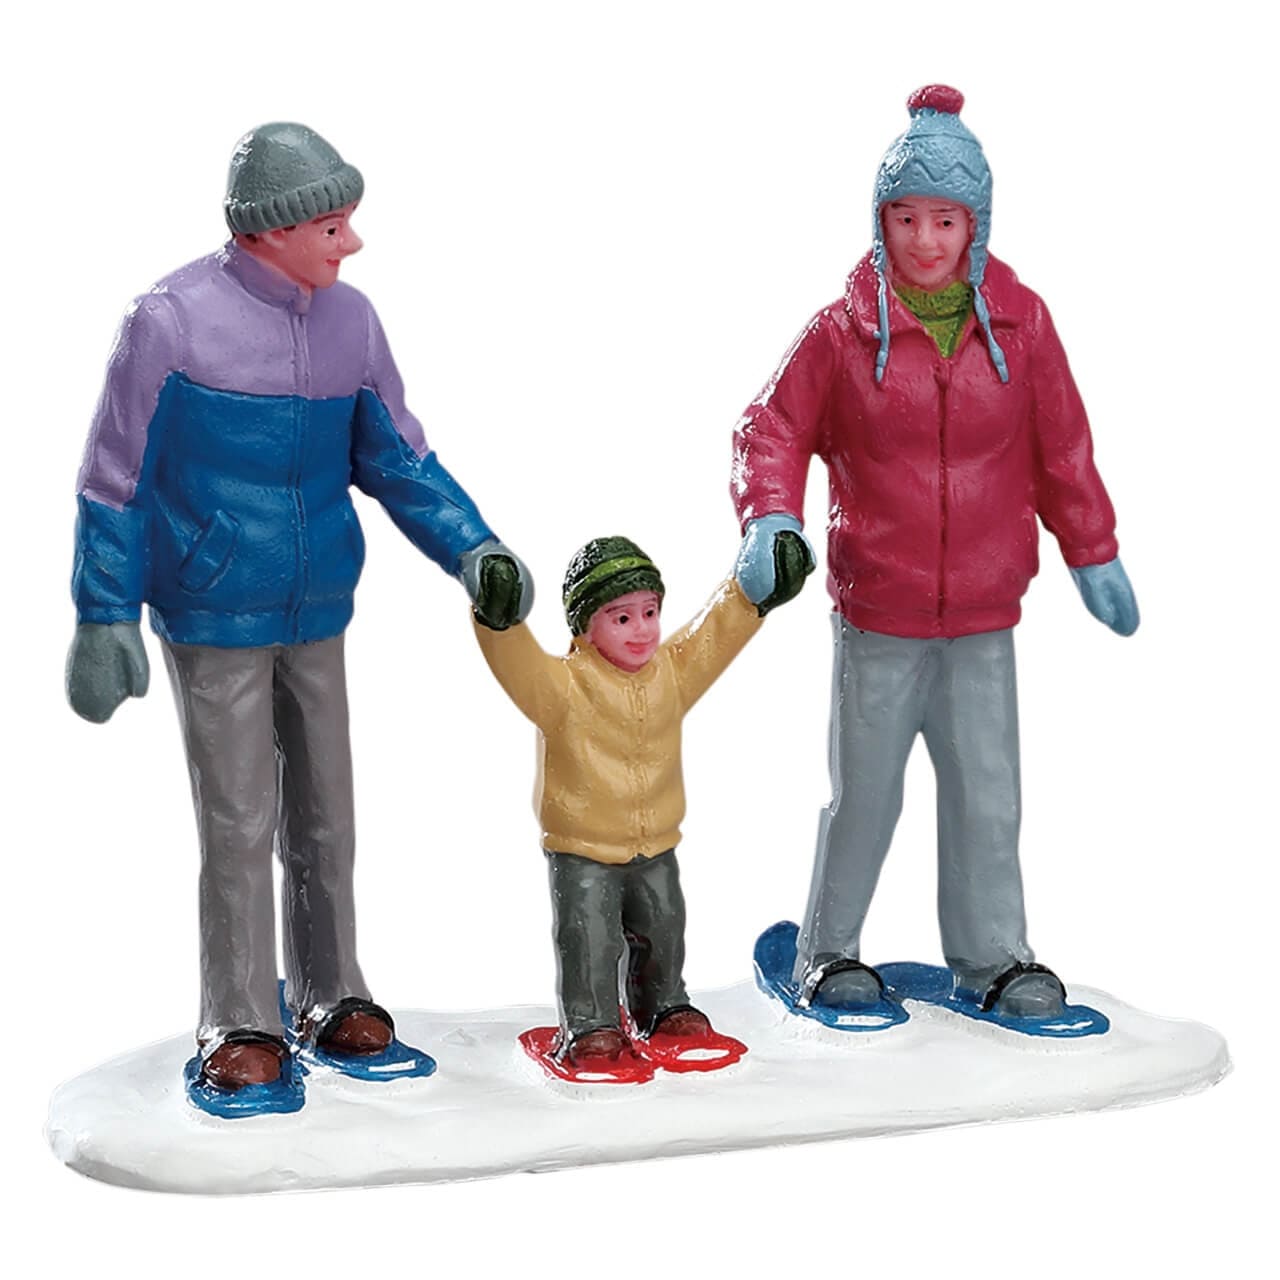 Lemax Figurines Lemax Snowshoe Family